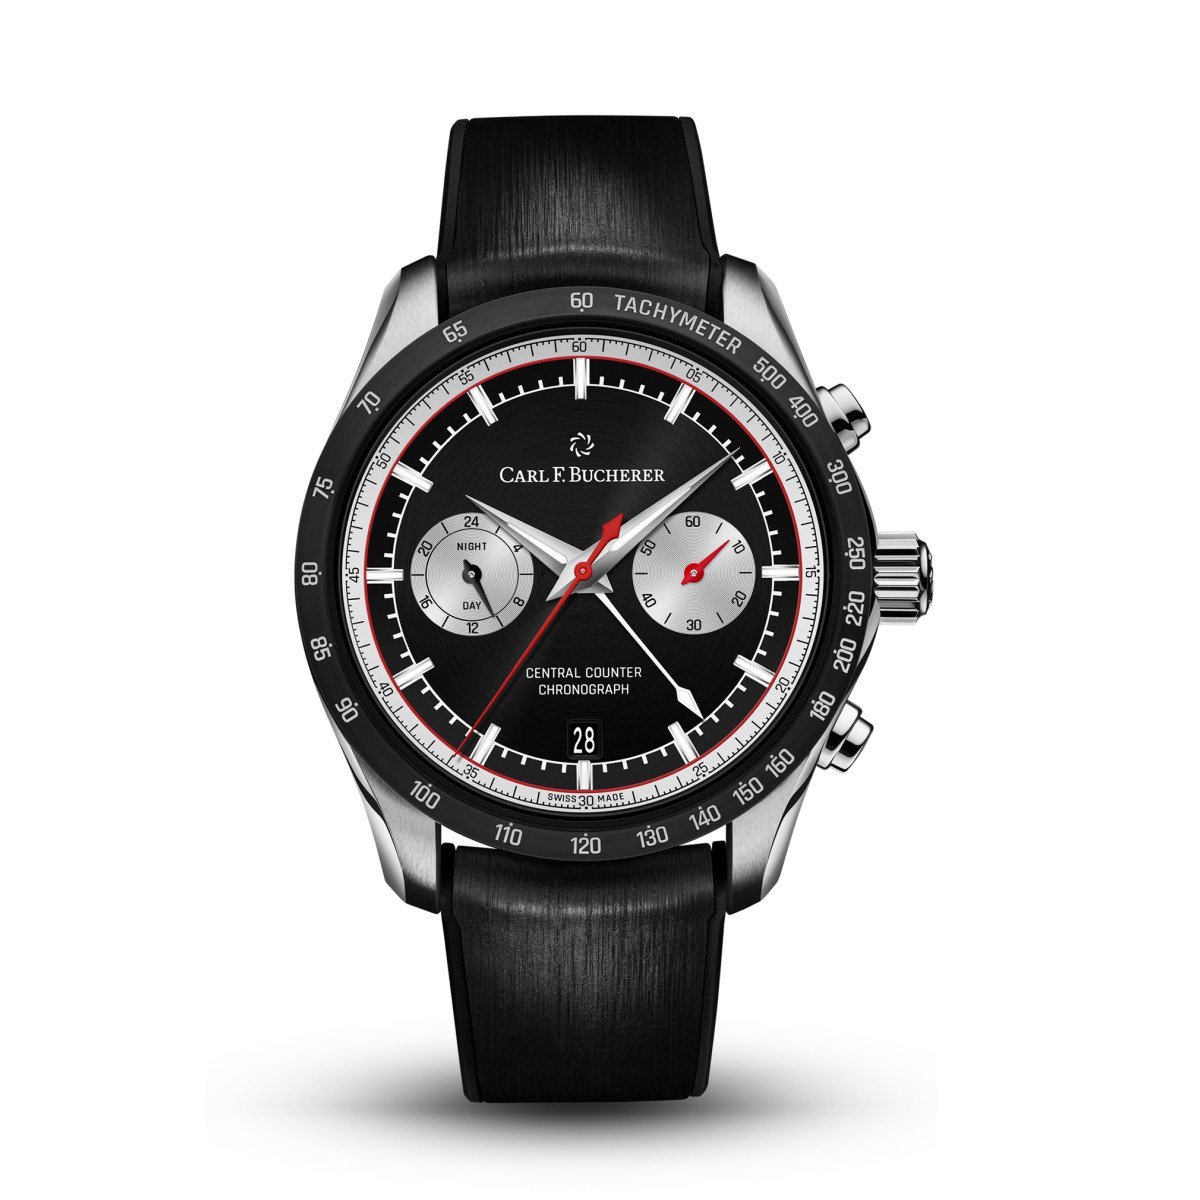 Carl F. Bucherer "Manero" Central Counter Limited Edition Watch